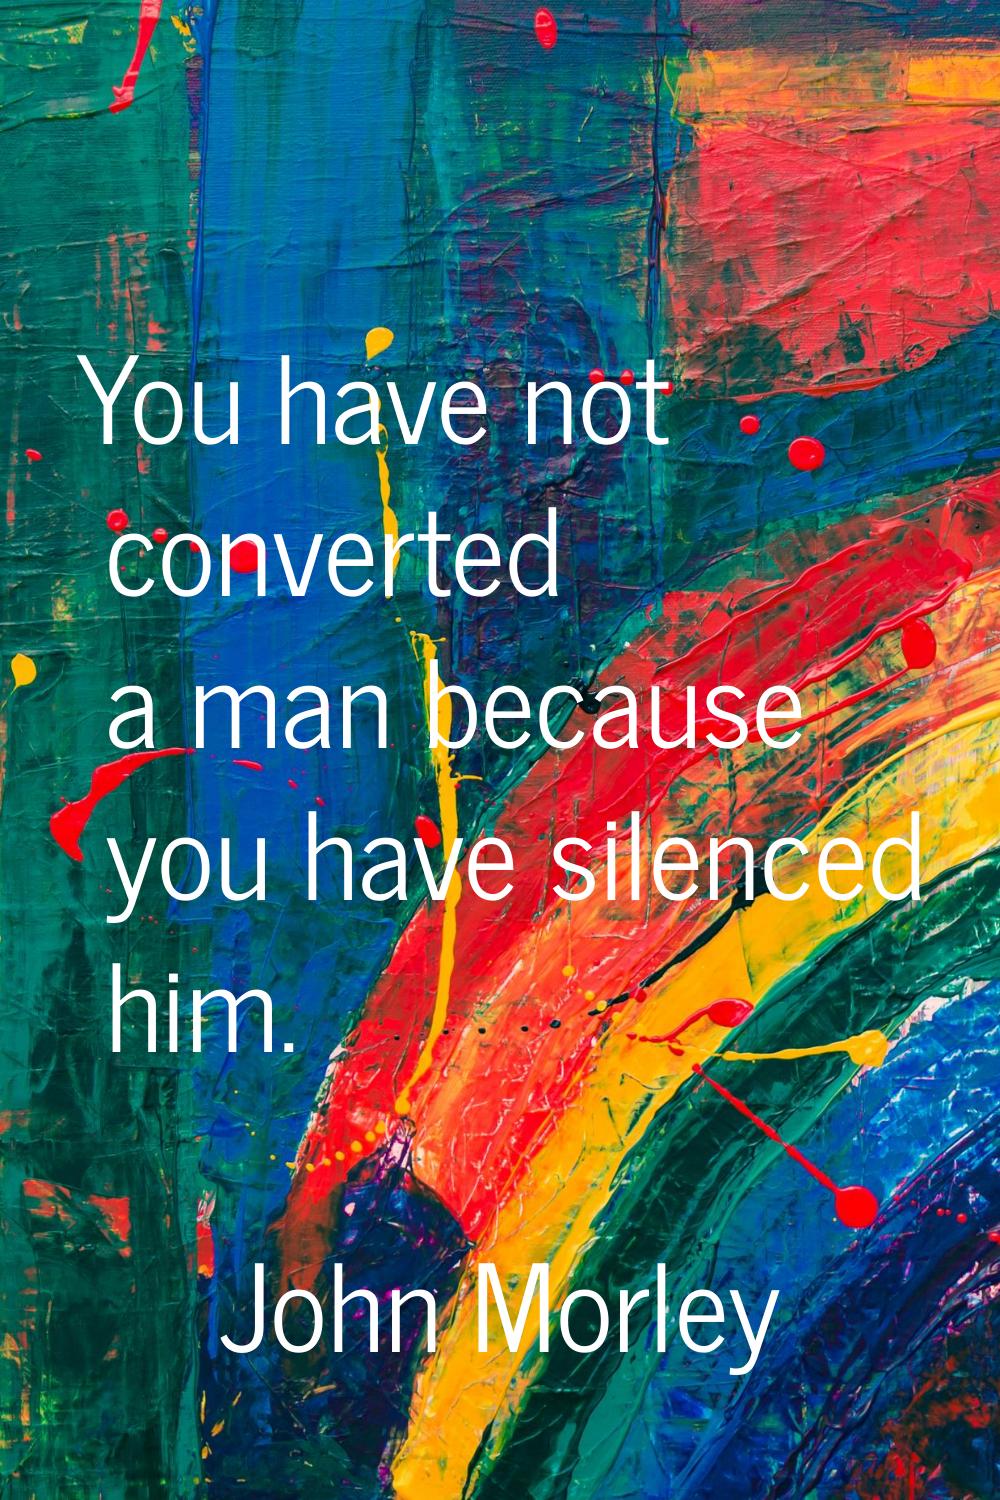 You have not converted a man because you have silenced him.